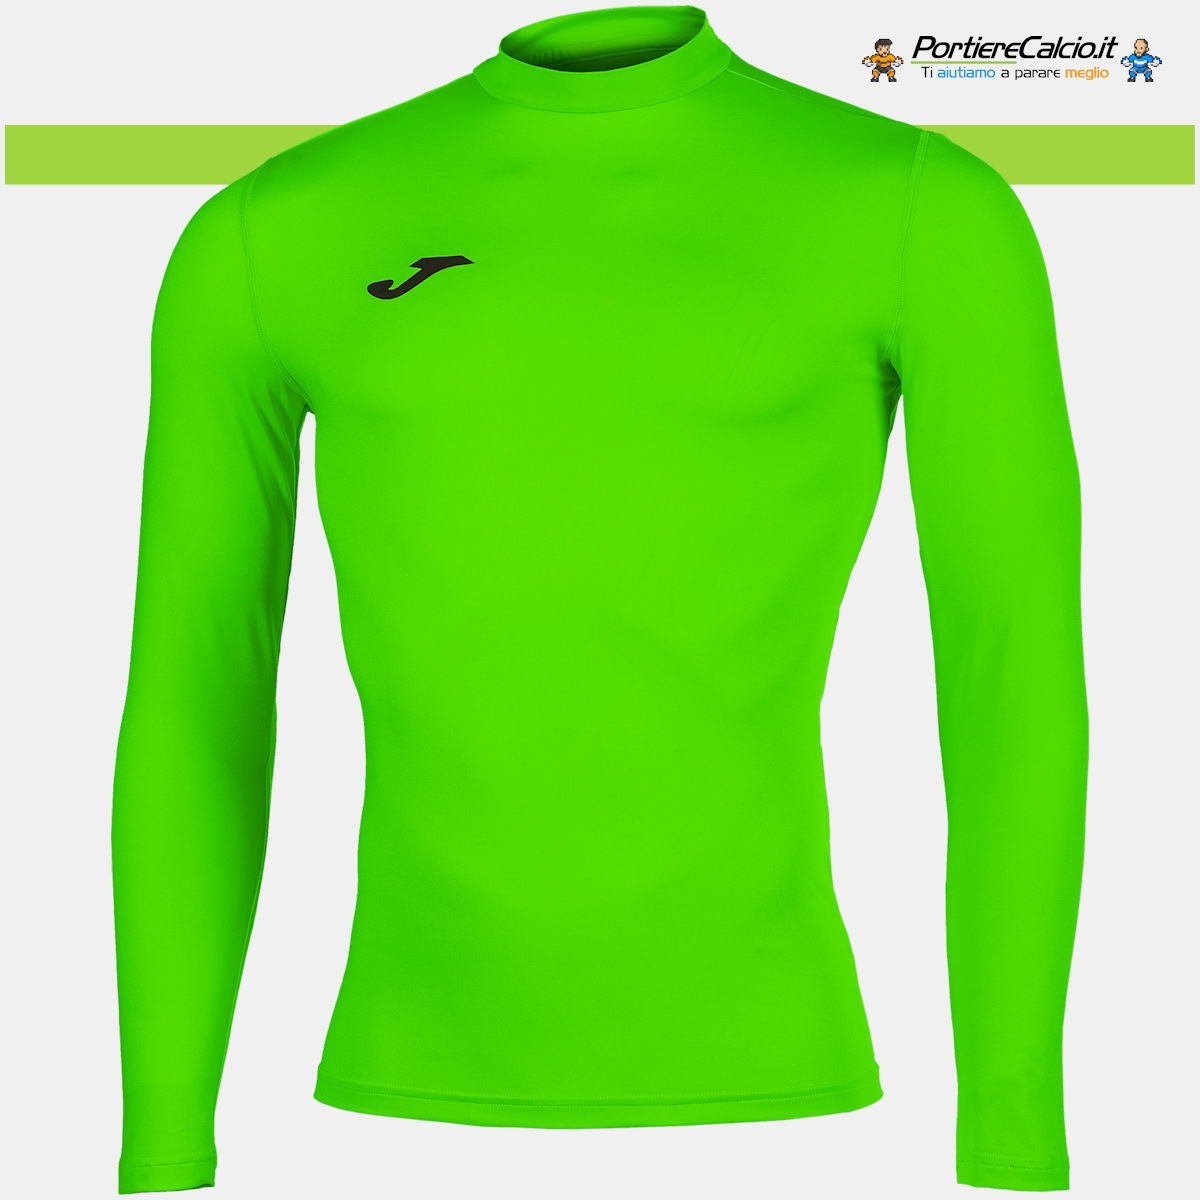 Sottomaglia Academy verde fluo